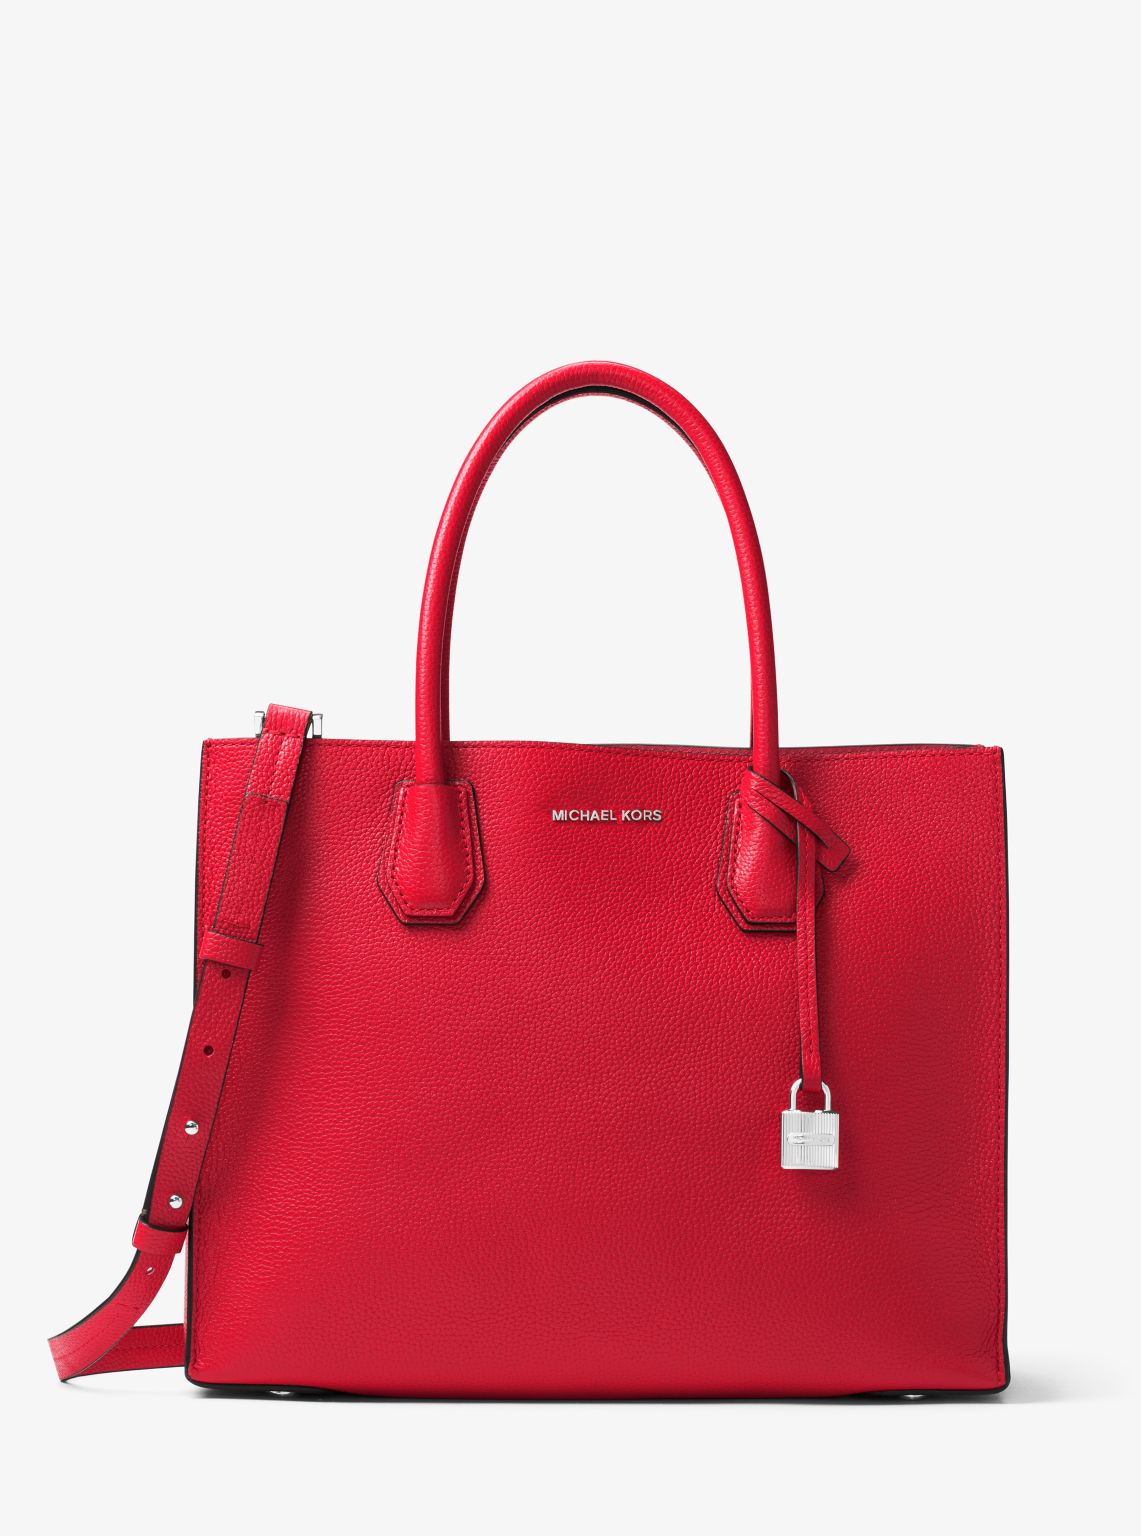 Michael Kors Mercer LARGE Leather Satchel Tote Bag in Cherry NWT